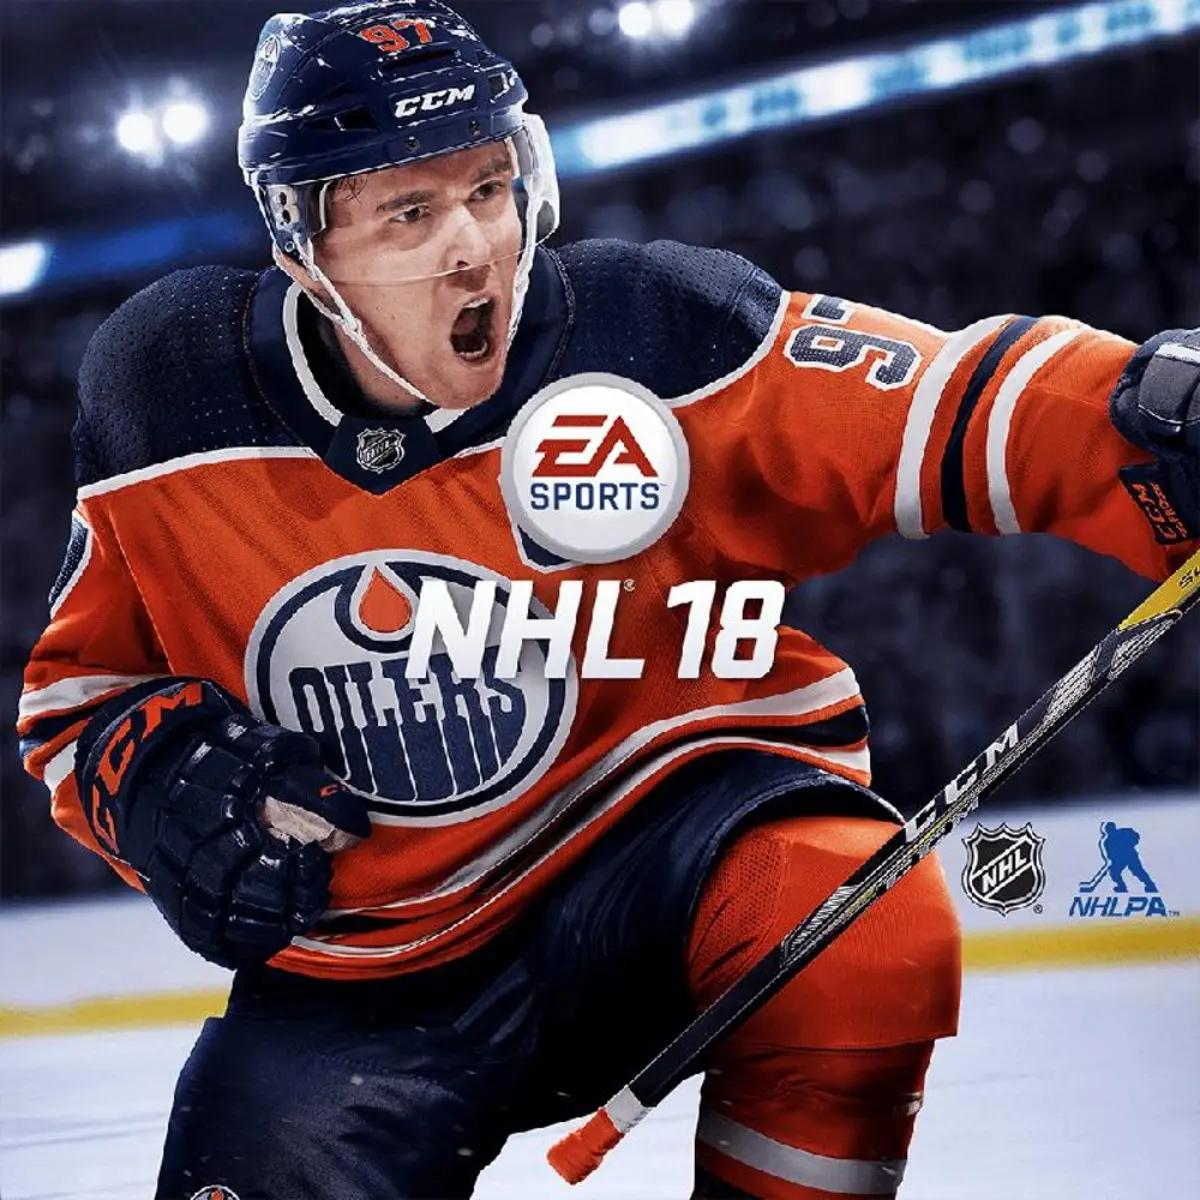 Connor McDavid on the NHL 18 cover.